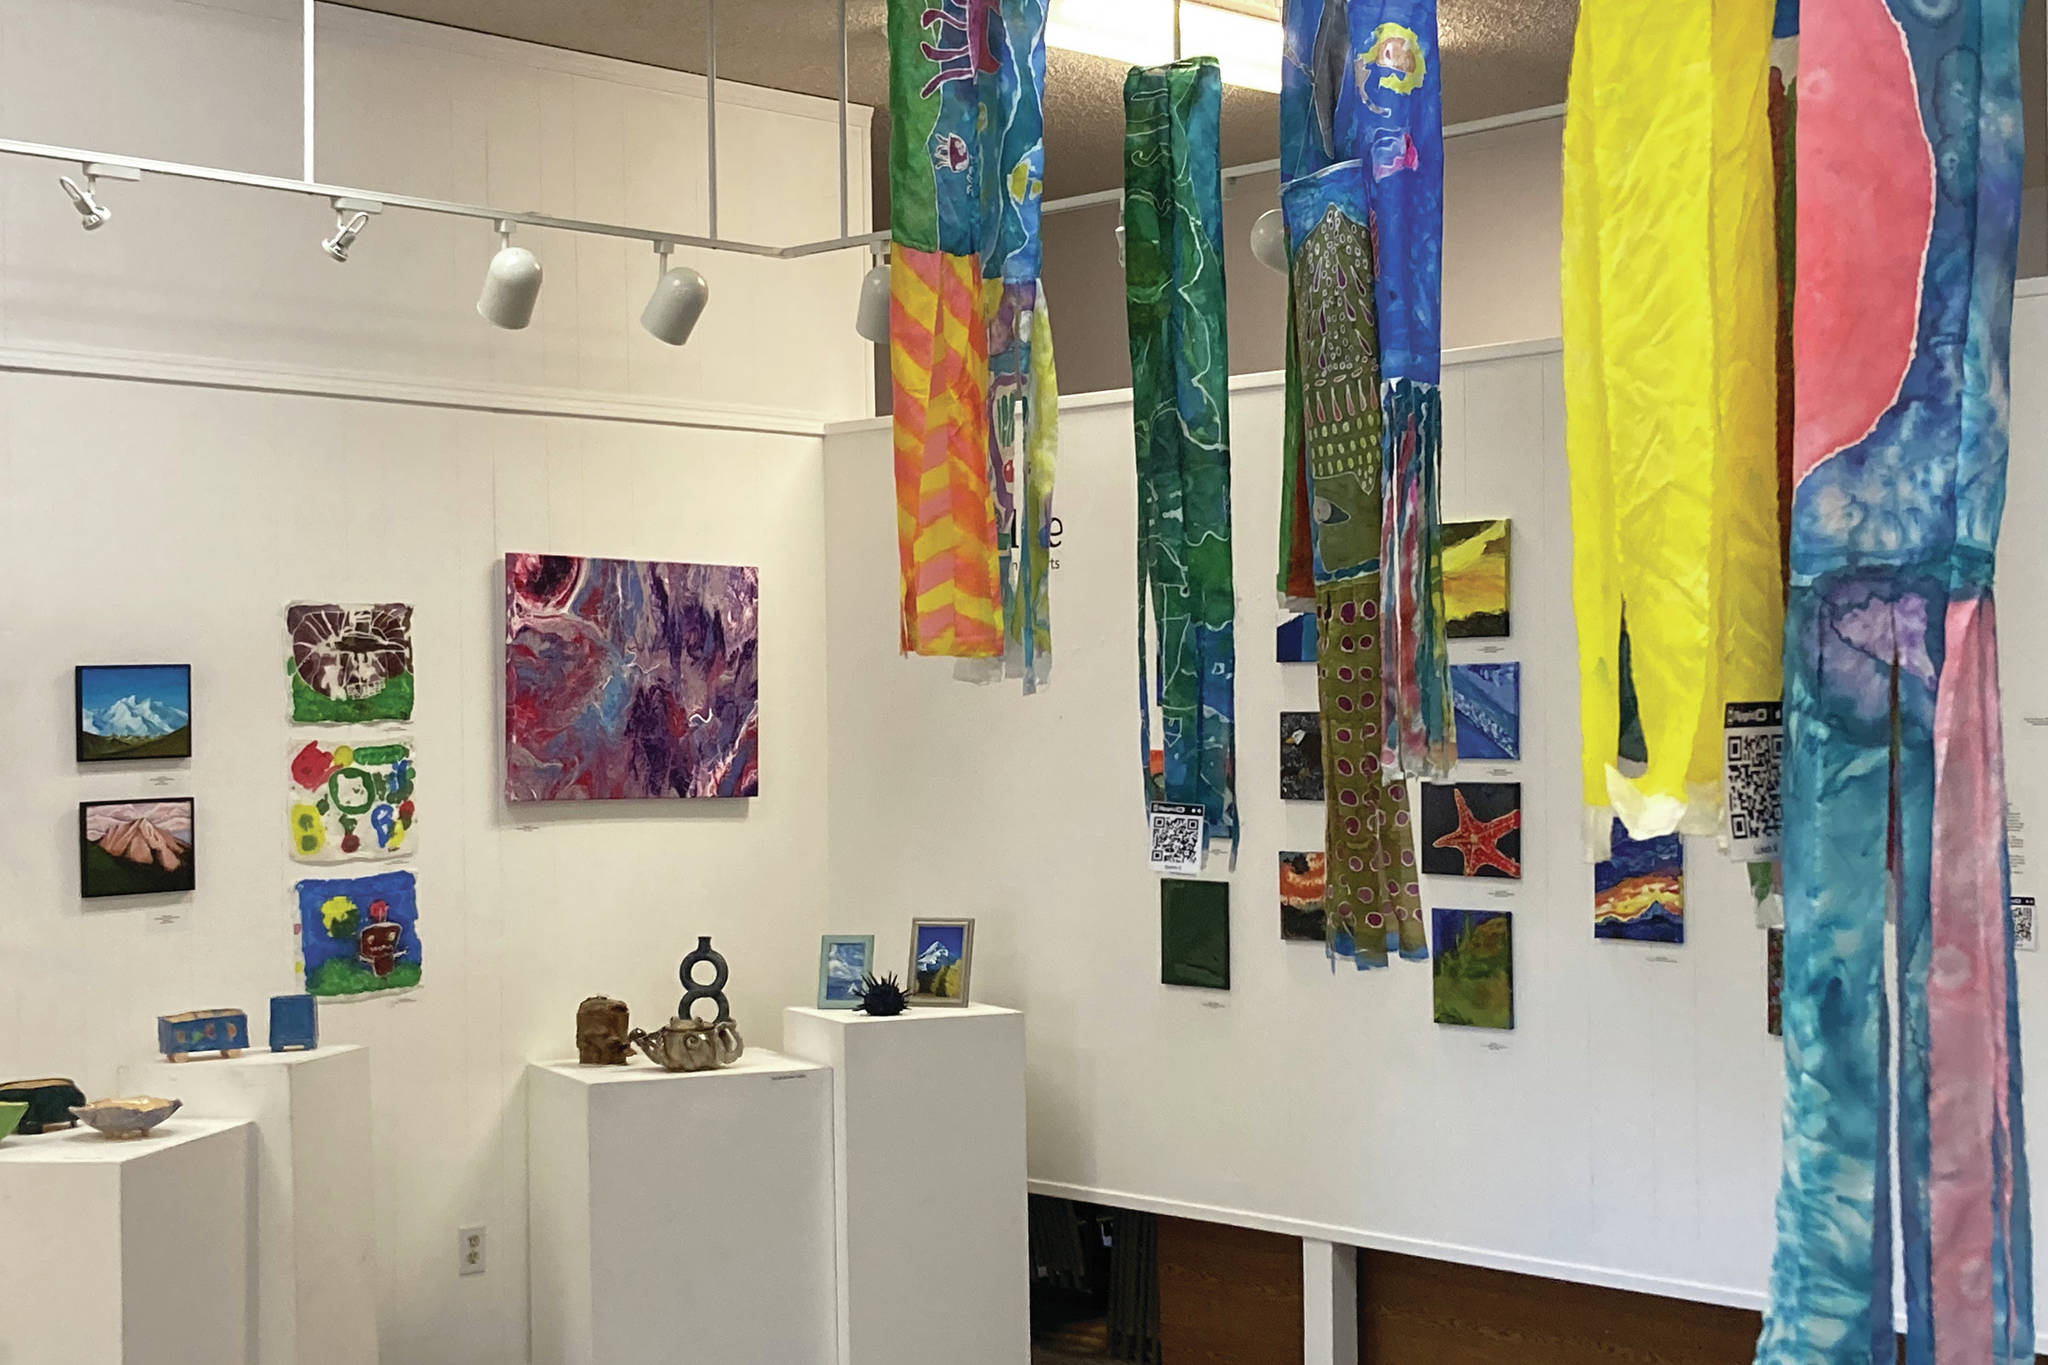 The Jubilee youth art show opened on Friday, April 2, 2021, at the Homer Council on the Arts in Homer, Alaska. (Photo by Michael Armstrong/Homer News)